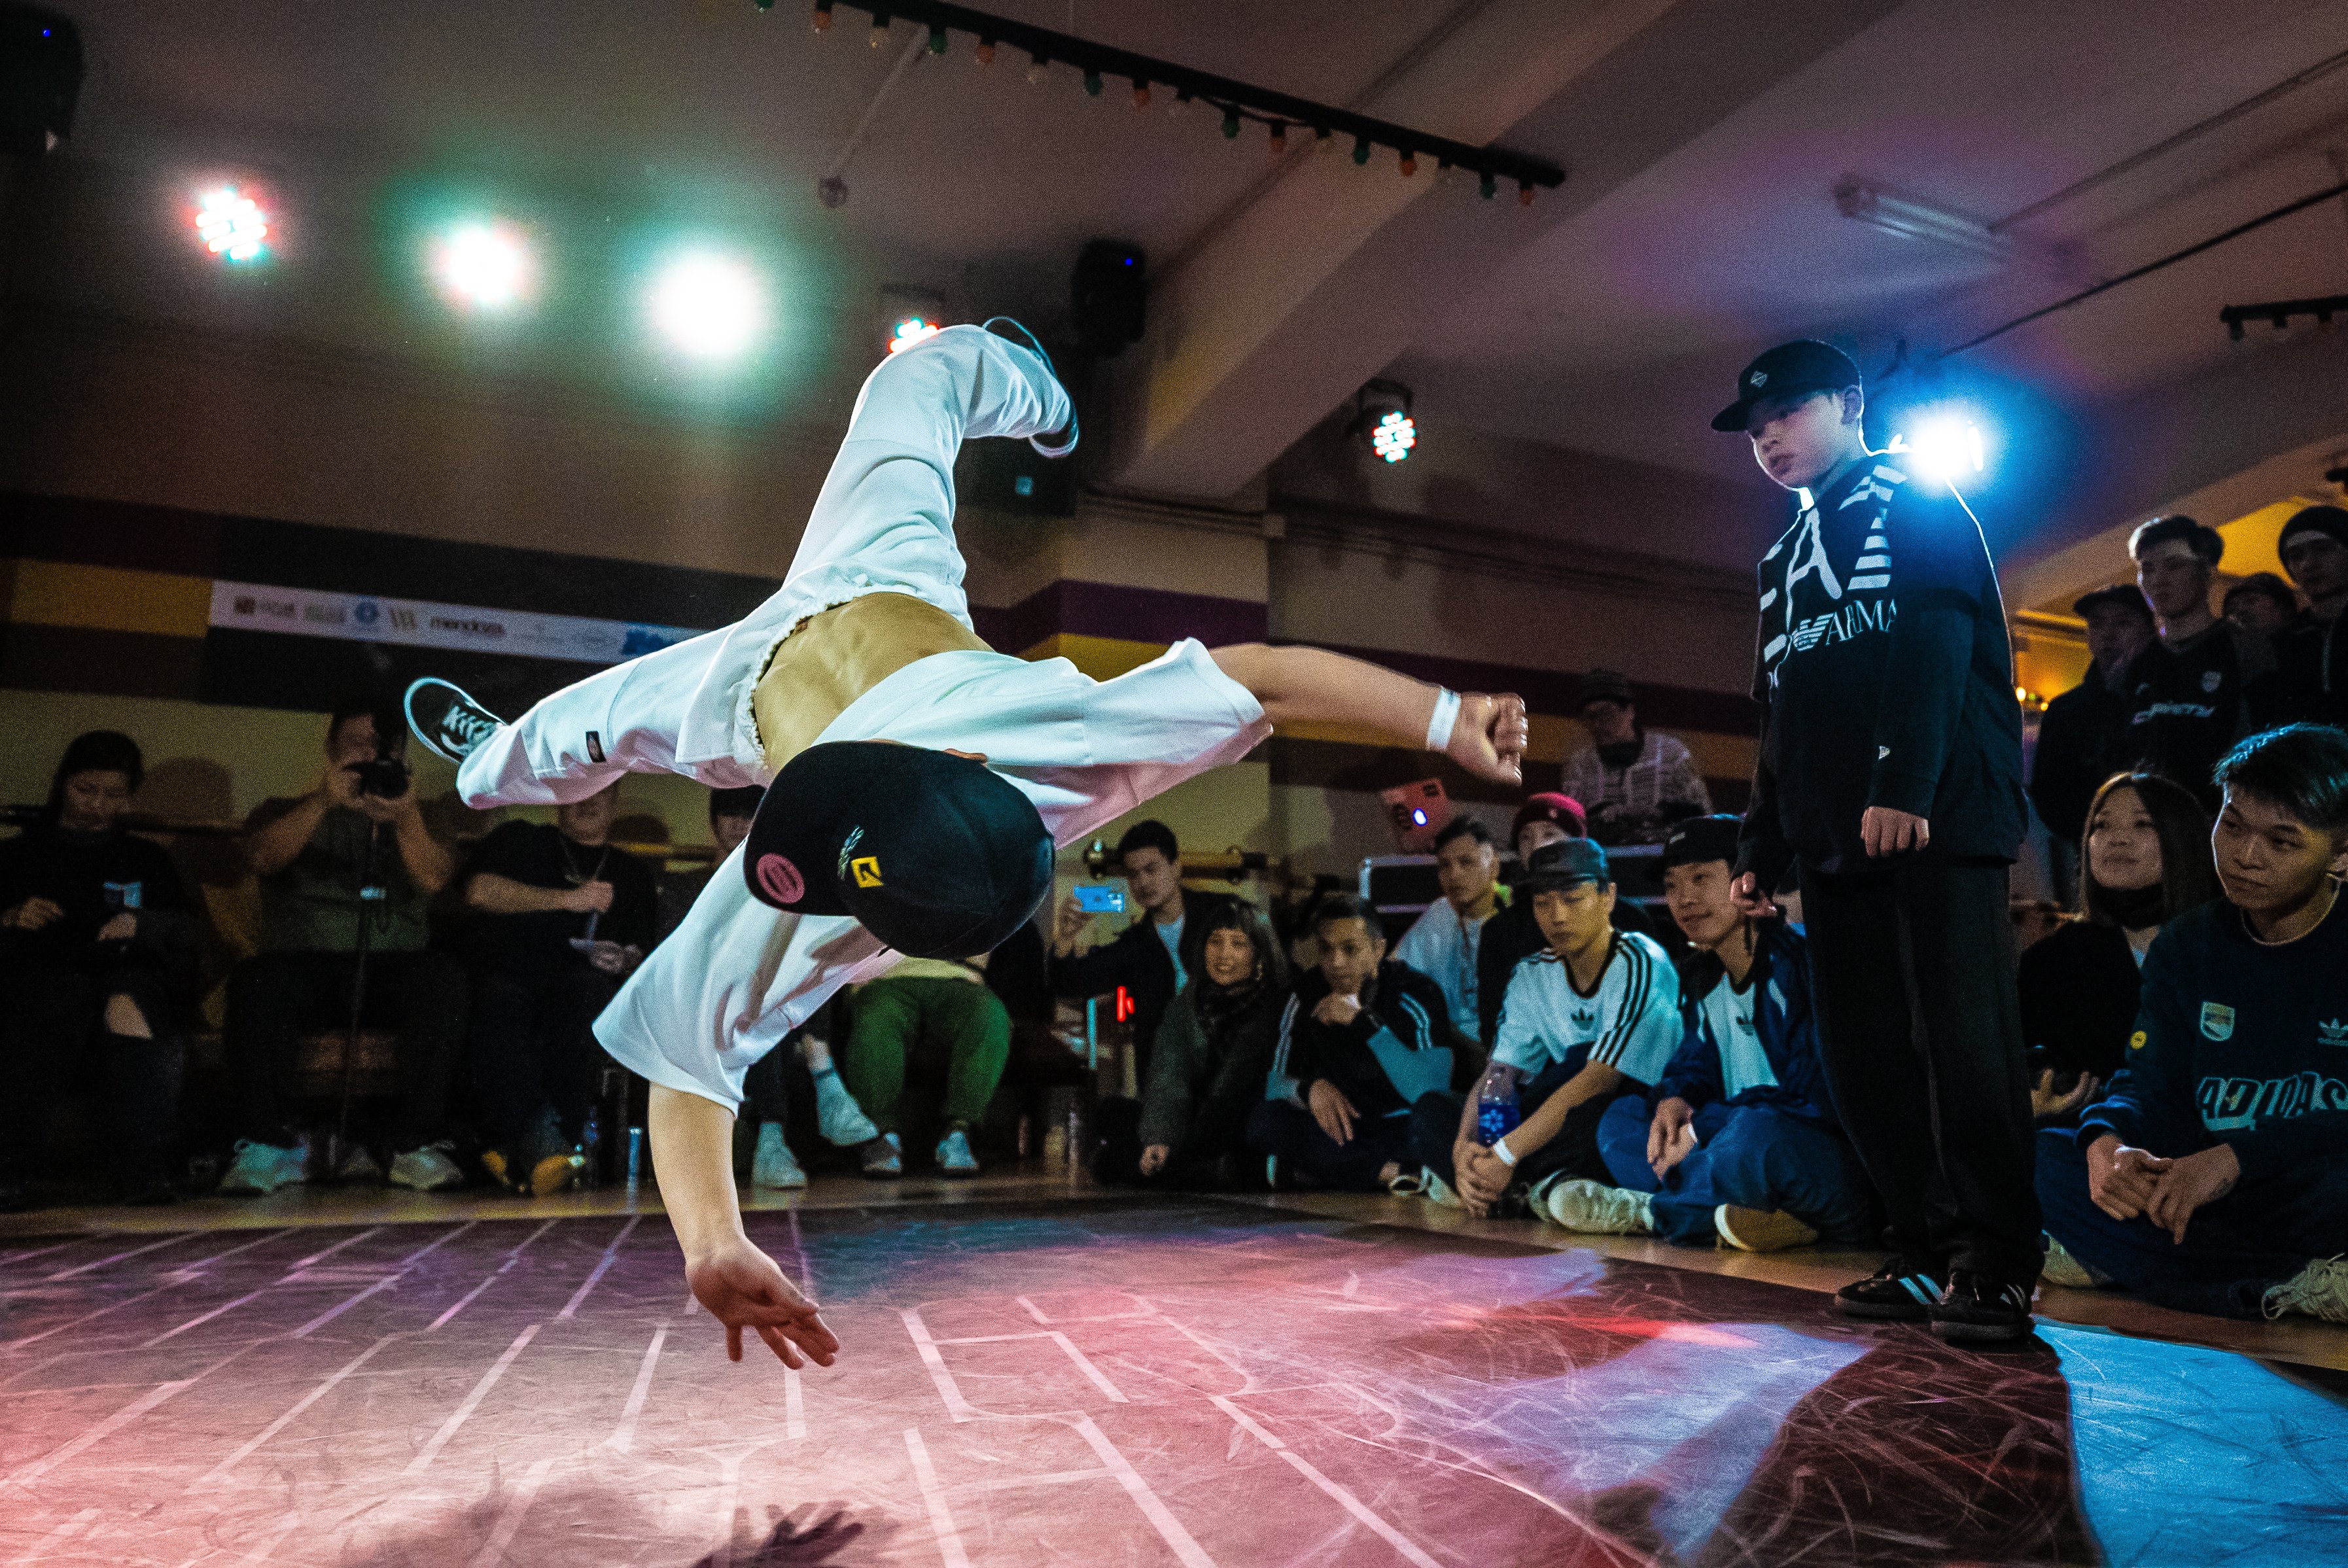 “Under the Lion’s Rock - Rise of the Dark Horses” saw two aspiring young breakers, Baobao from Hong Kong and Wato from Japan, participating in the “Youth is the Future” battle in the under-13 category. Photo: Haru Graphics - FE Works, Ayato Photographer, Ching On Photography